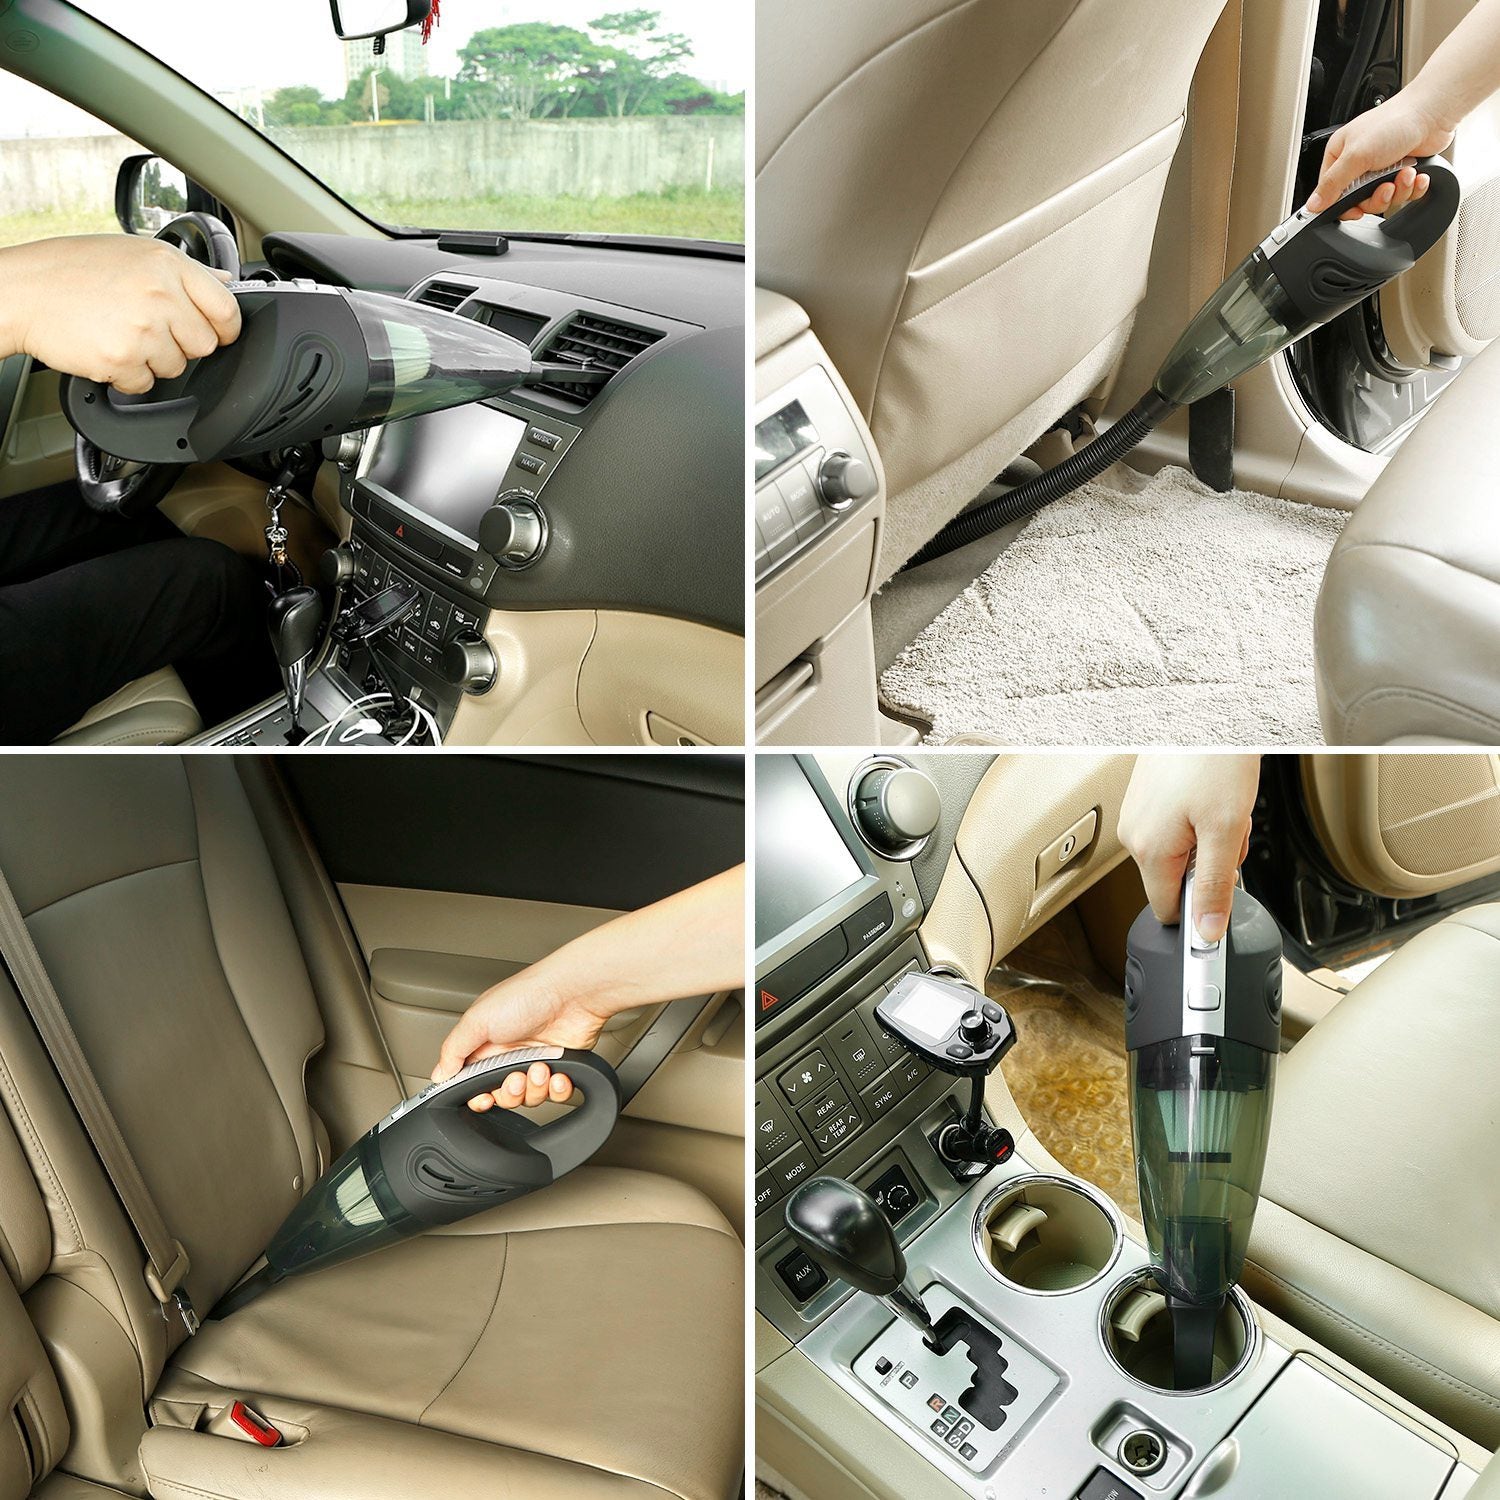 This Car Handheld Vacuum Cleaner Cordless Rechargeable Hand Vacuum Portable Strong Suction Vacuum combines a powerful motor and cyclonic suction for optimal cleaning, while offering the added benefits of a HEPA filter and a distinctive blue light.